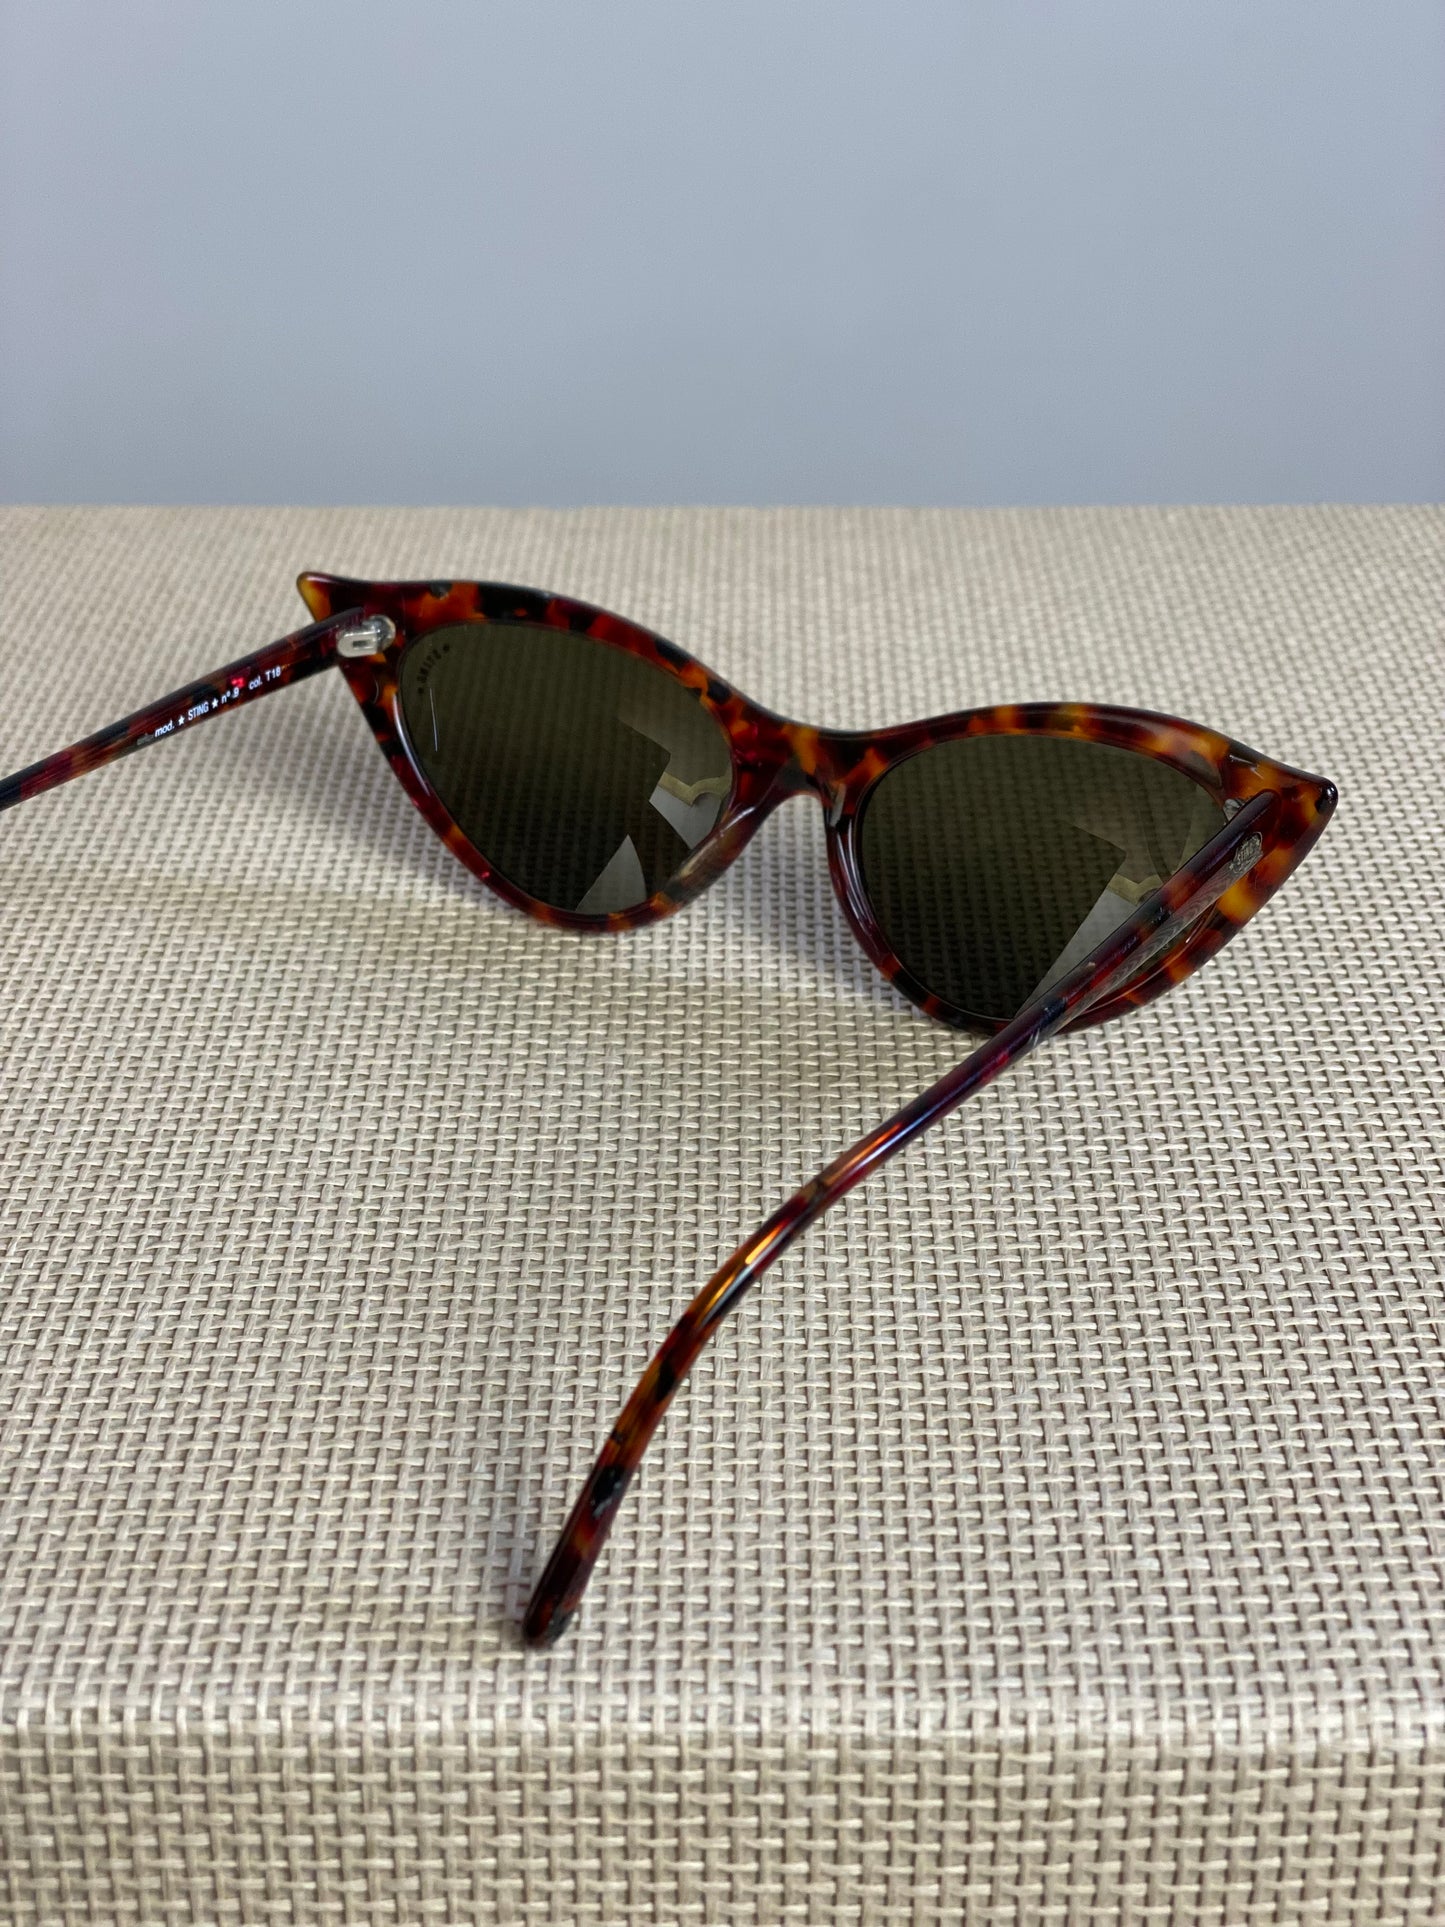 Vintage '80s Cat-Eye Sunglasses by Sting